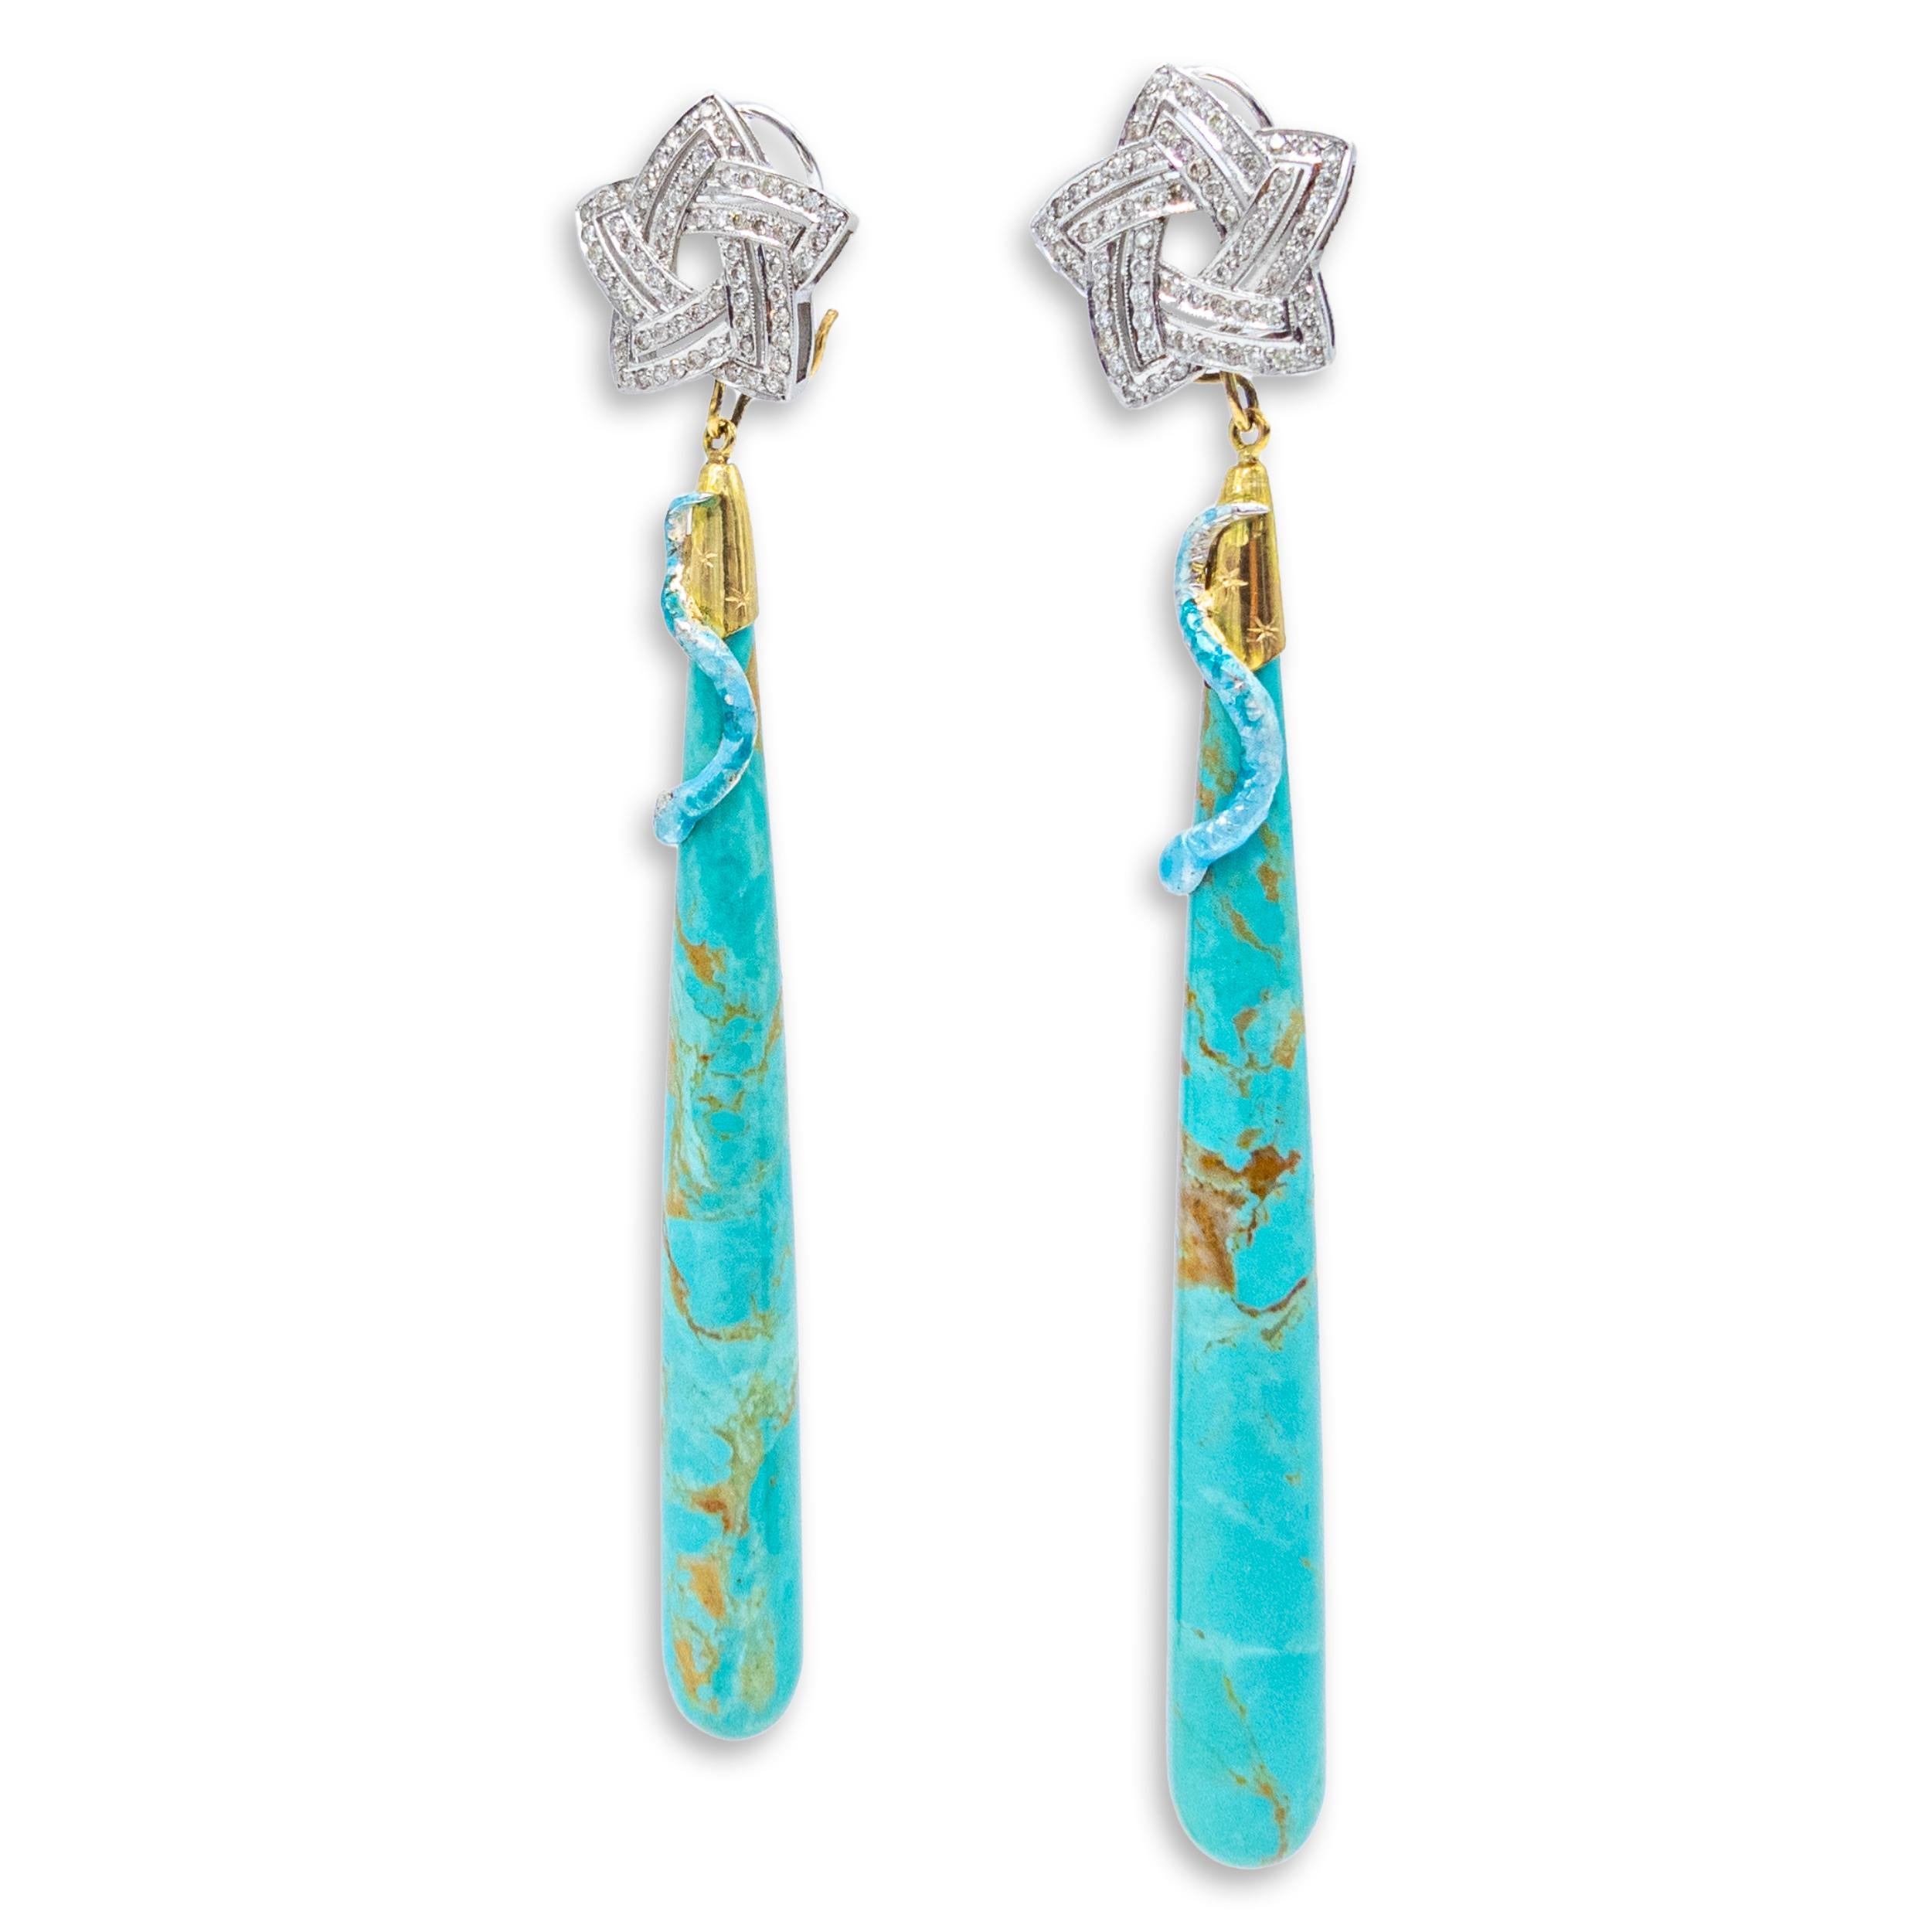 21st Century White Yellow Gold Blue Turquoise Star Diamonds Silver Enamel snakes

Earrings made of white gold, 18 Karat gold, enameled silver, diamonds and two blue turquoise drop-shaped. The top star is removable, so you can wear only the top part.